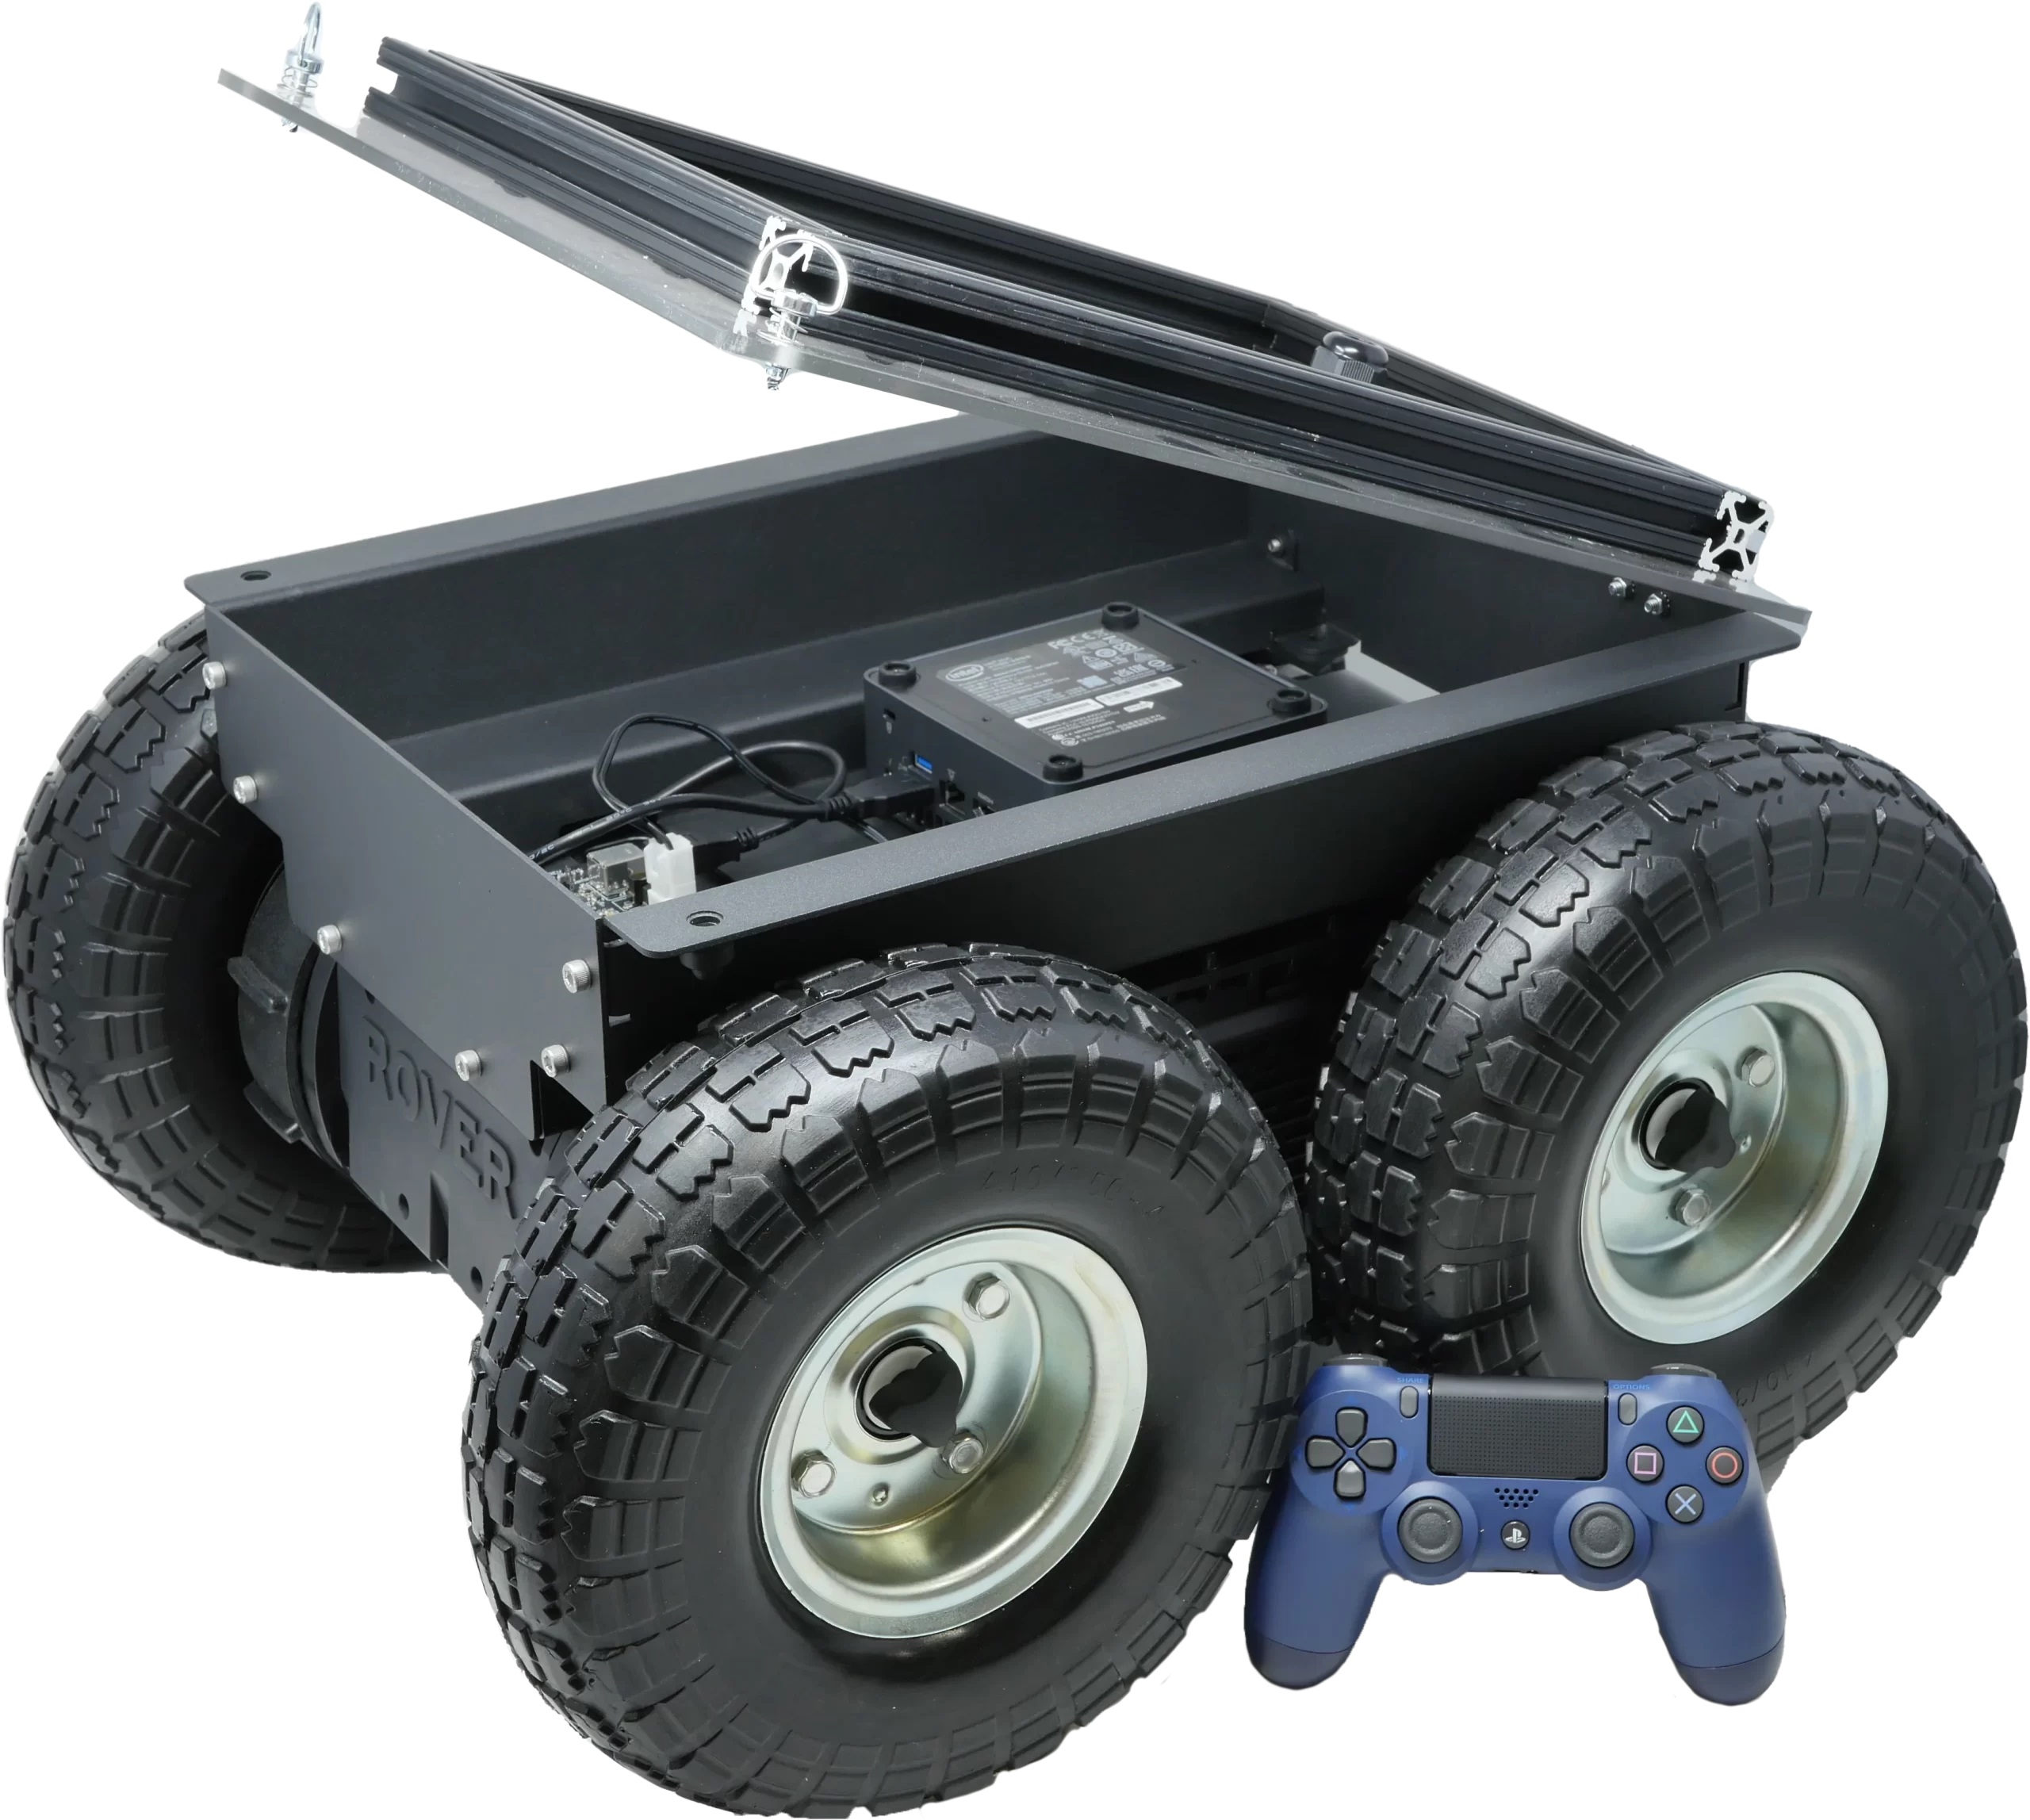 This robot is ready for whatever you throw. With a chassis designed to take a beating, the Rover Pro is a highly rugged and capable mobile robotics platform.